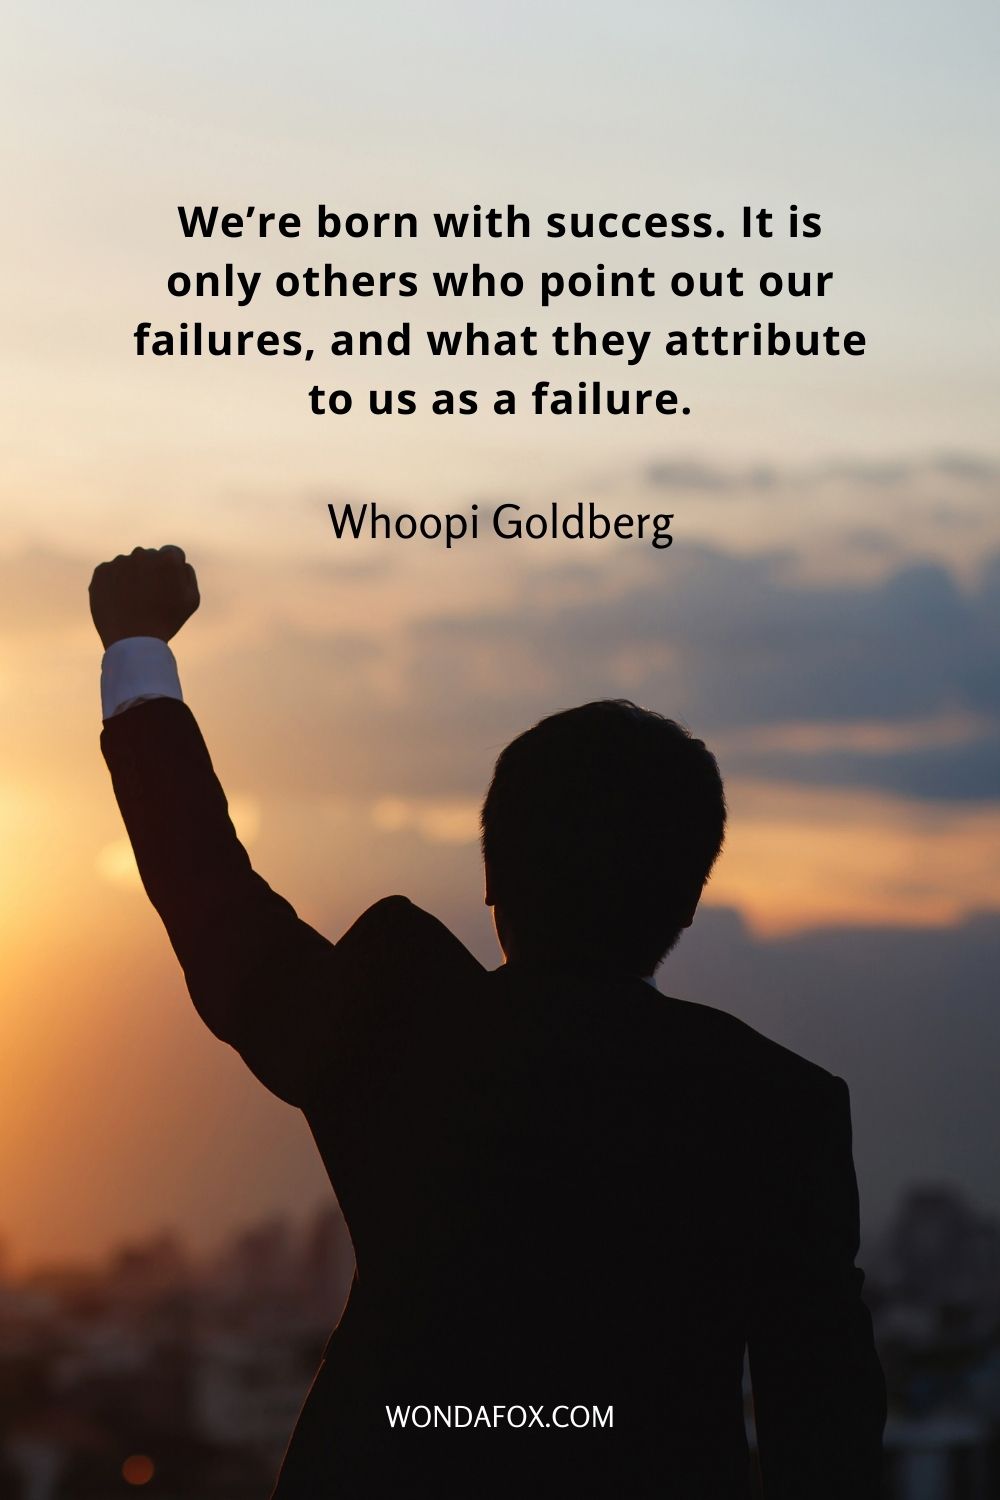 We’re born with success. It is only others who point out our failures, and what they attribute to us as a failure.